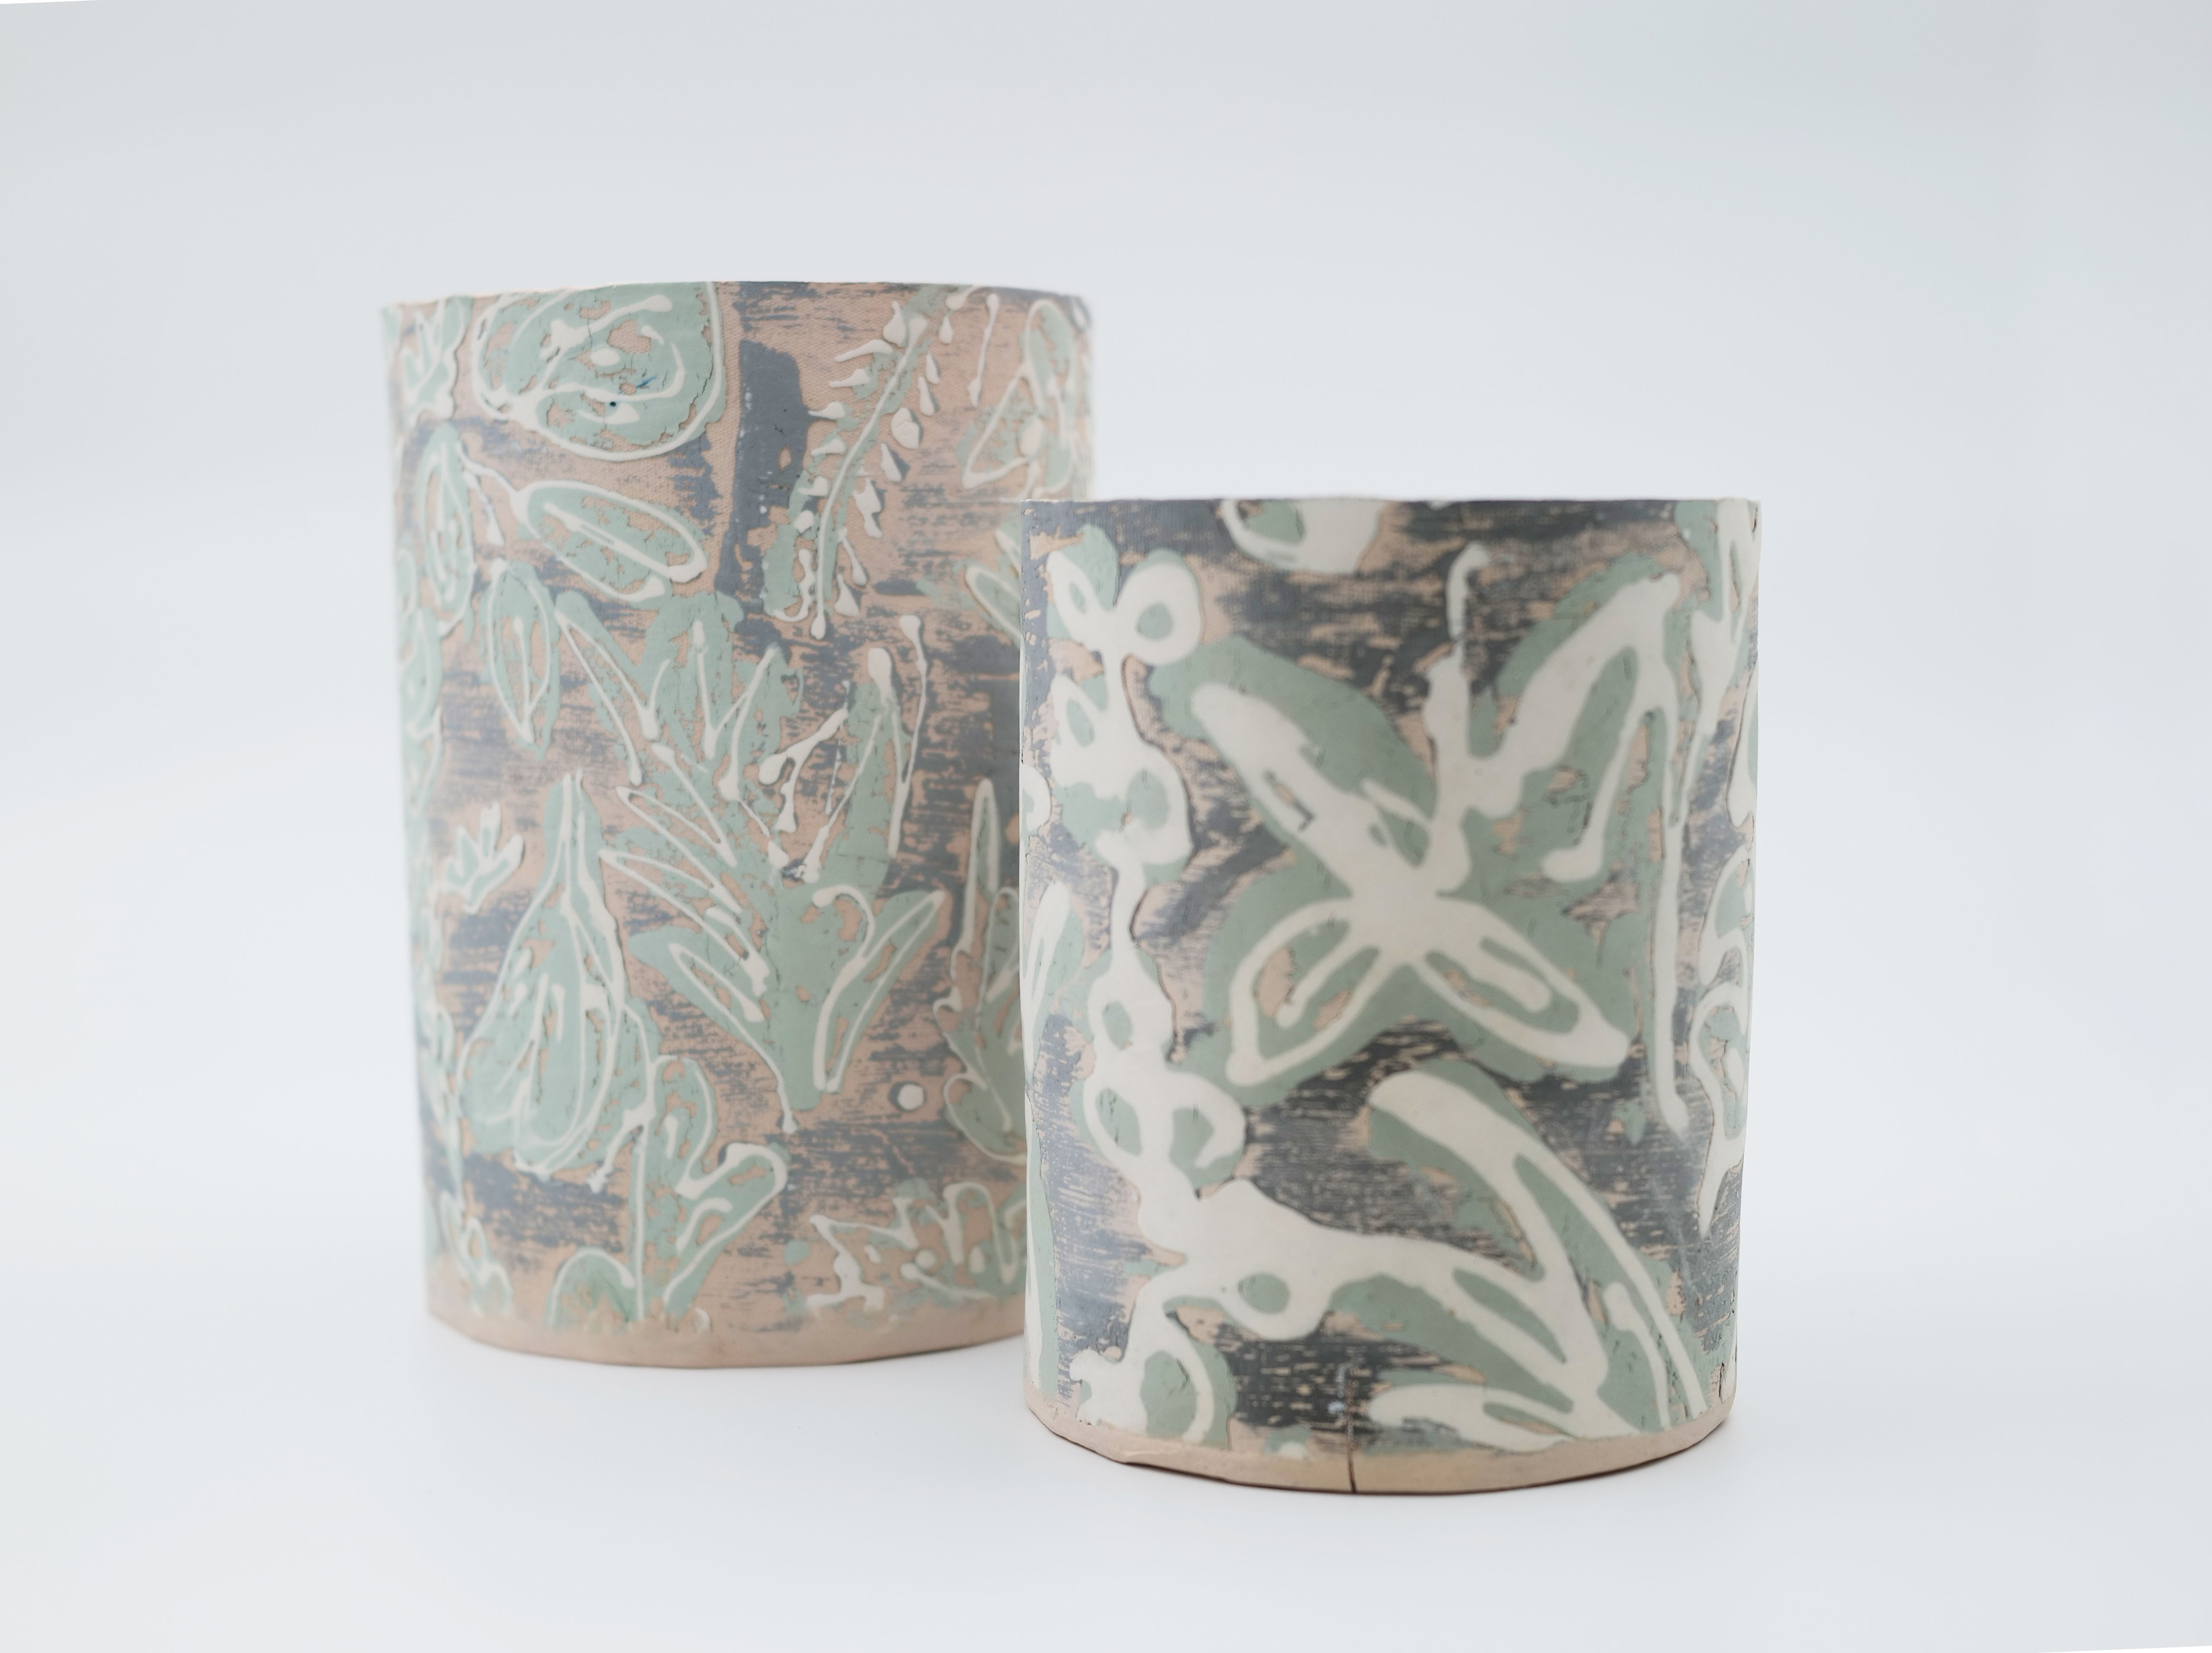 Join ceramicist Hayley West for a specialised ceramic short course exploring monoprinting.